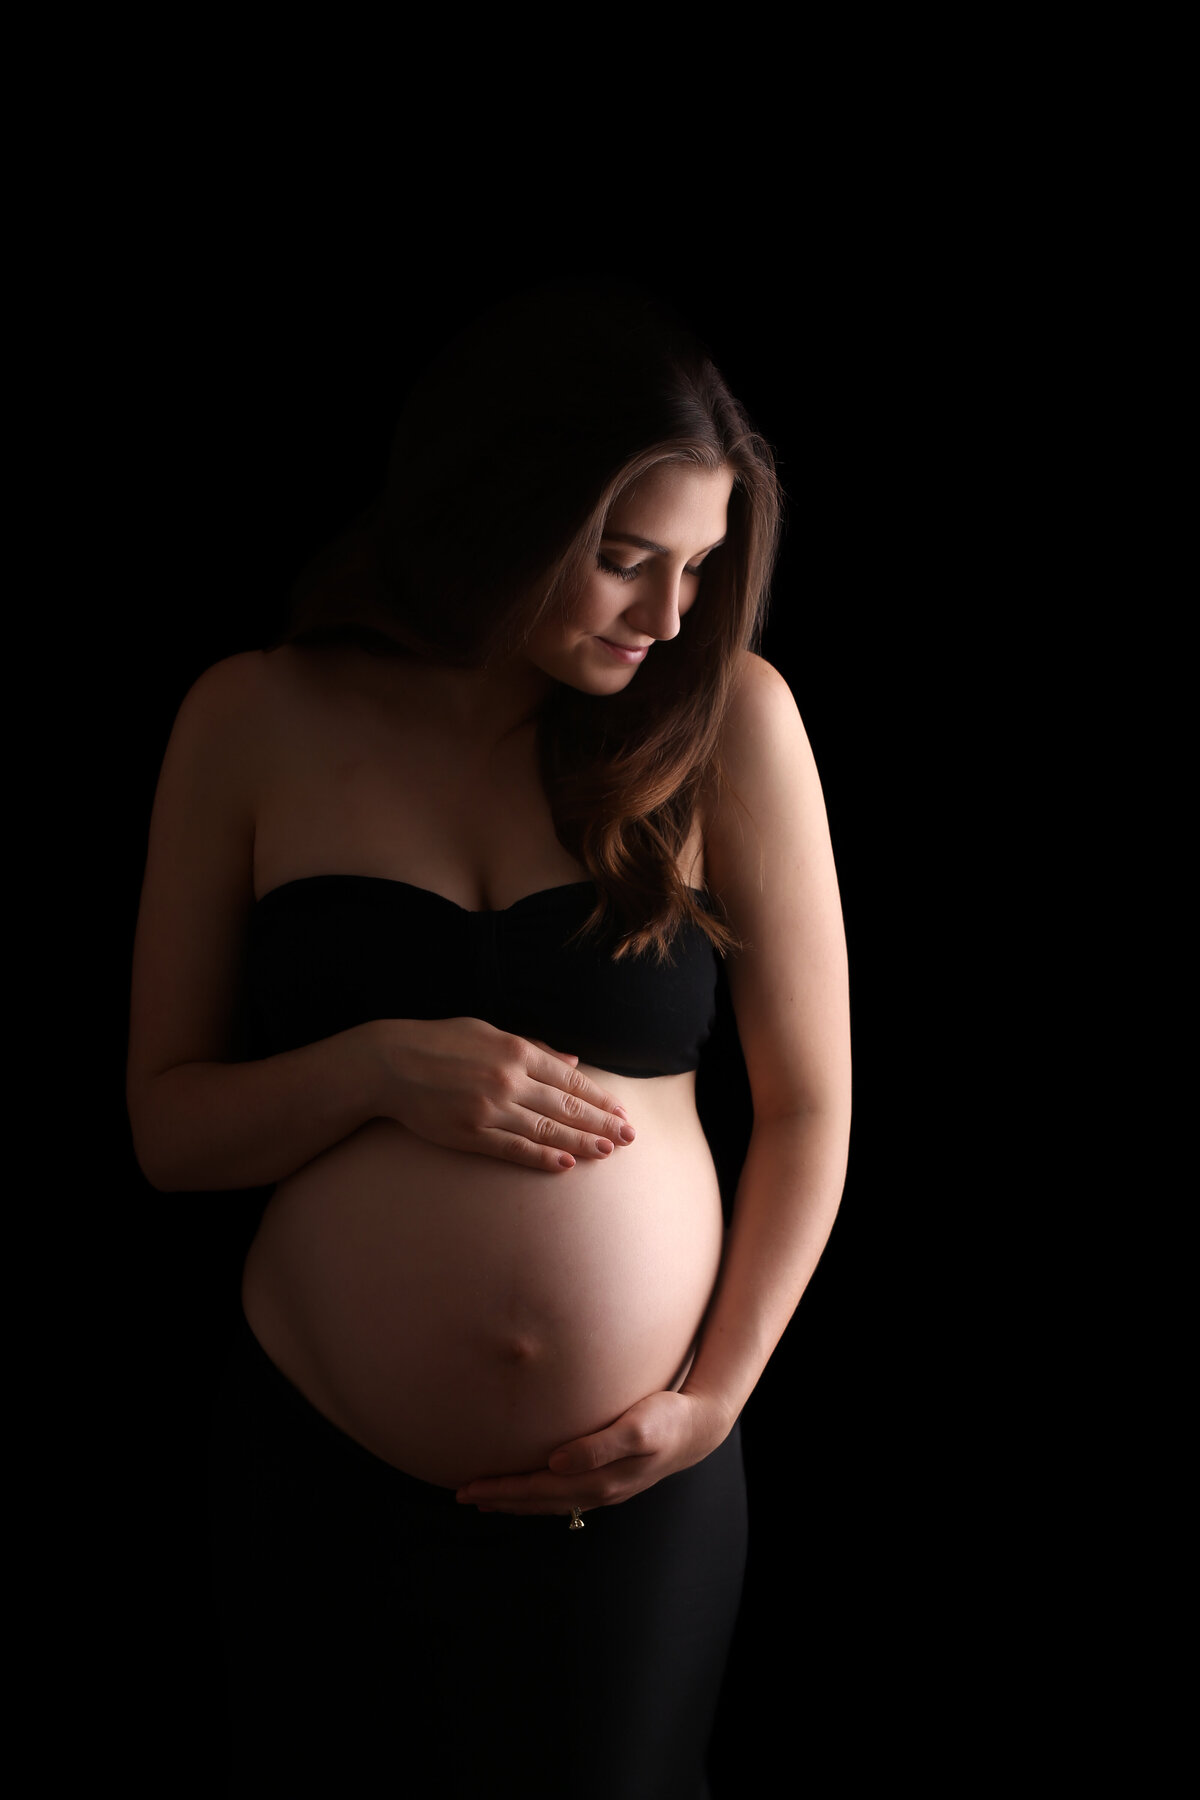 Pregnant mother with her hands lovingly placed on her belly